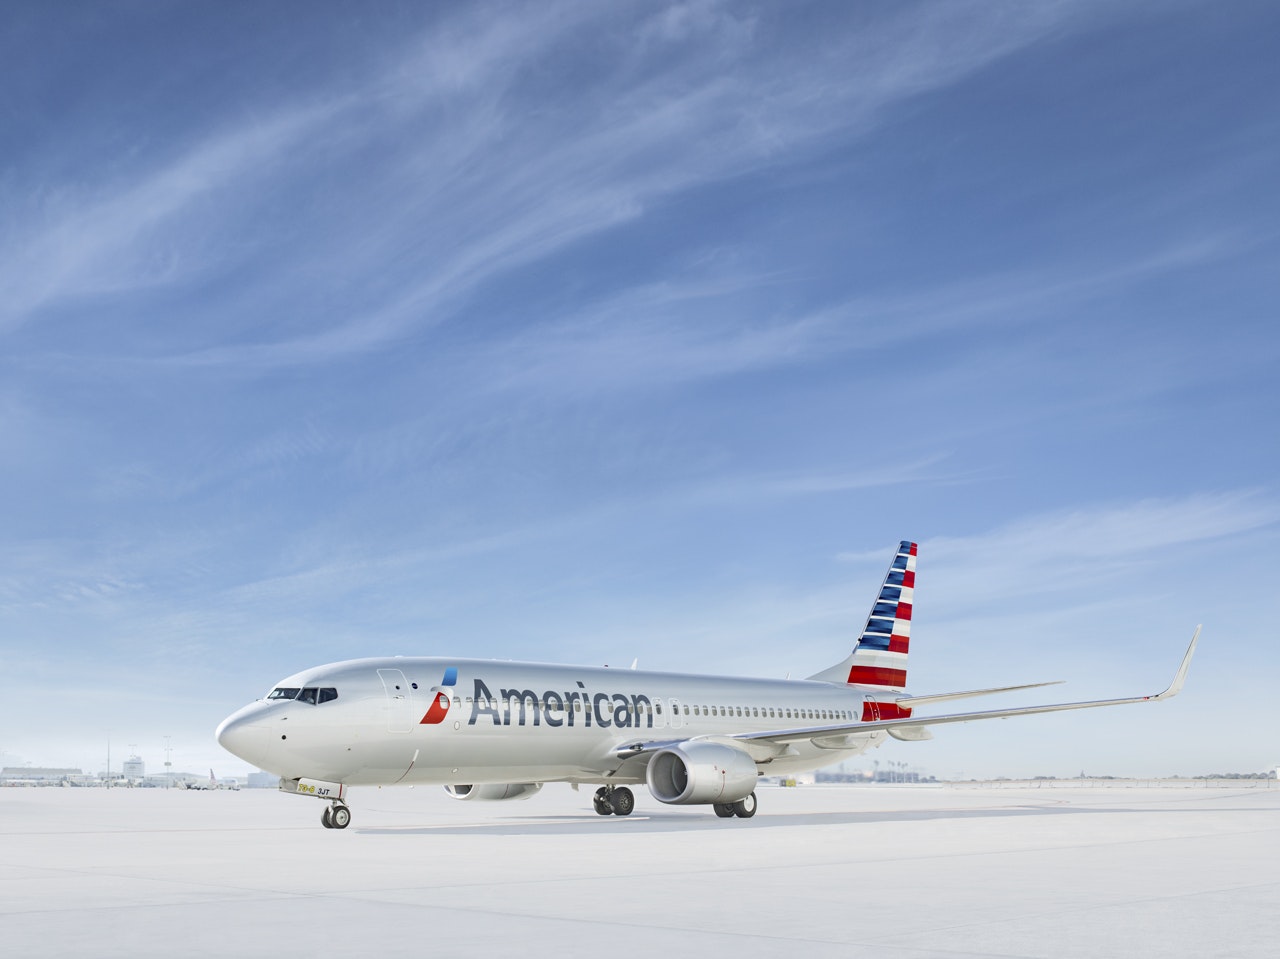 The exterior of American's 737 plane